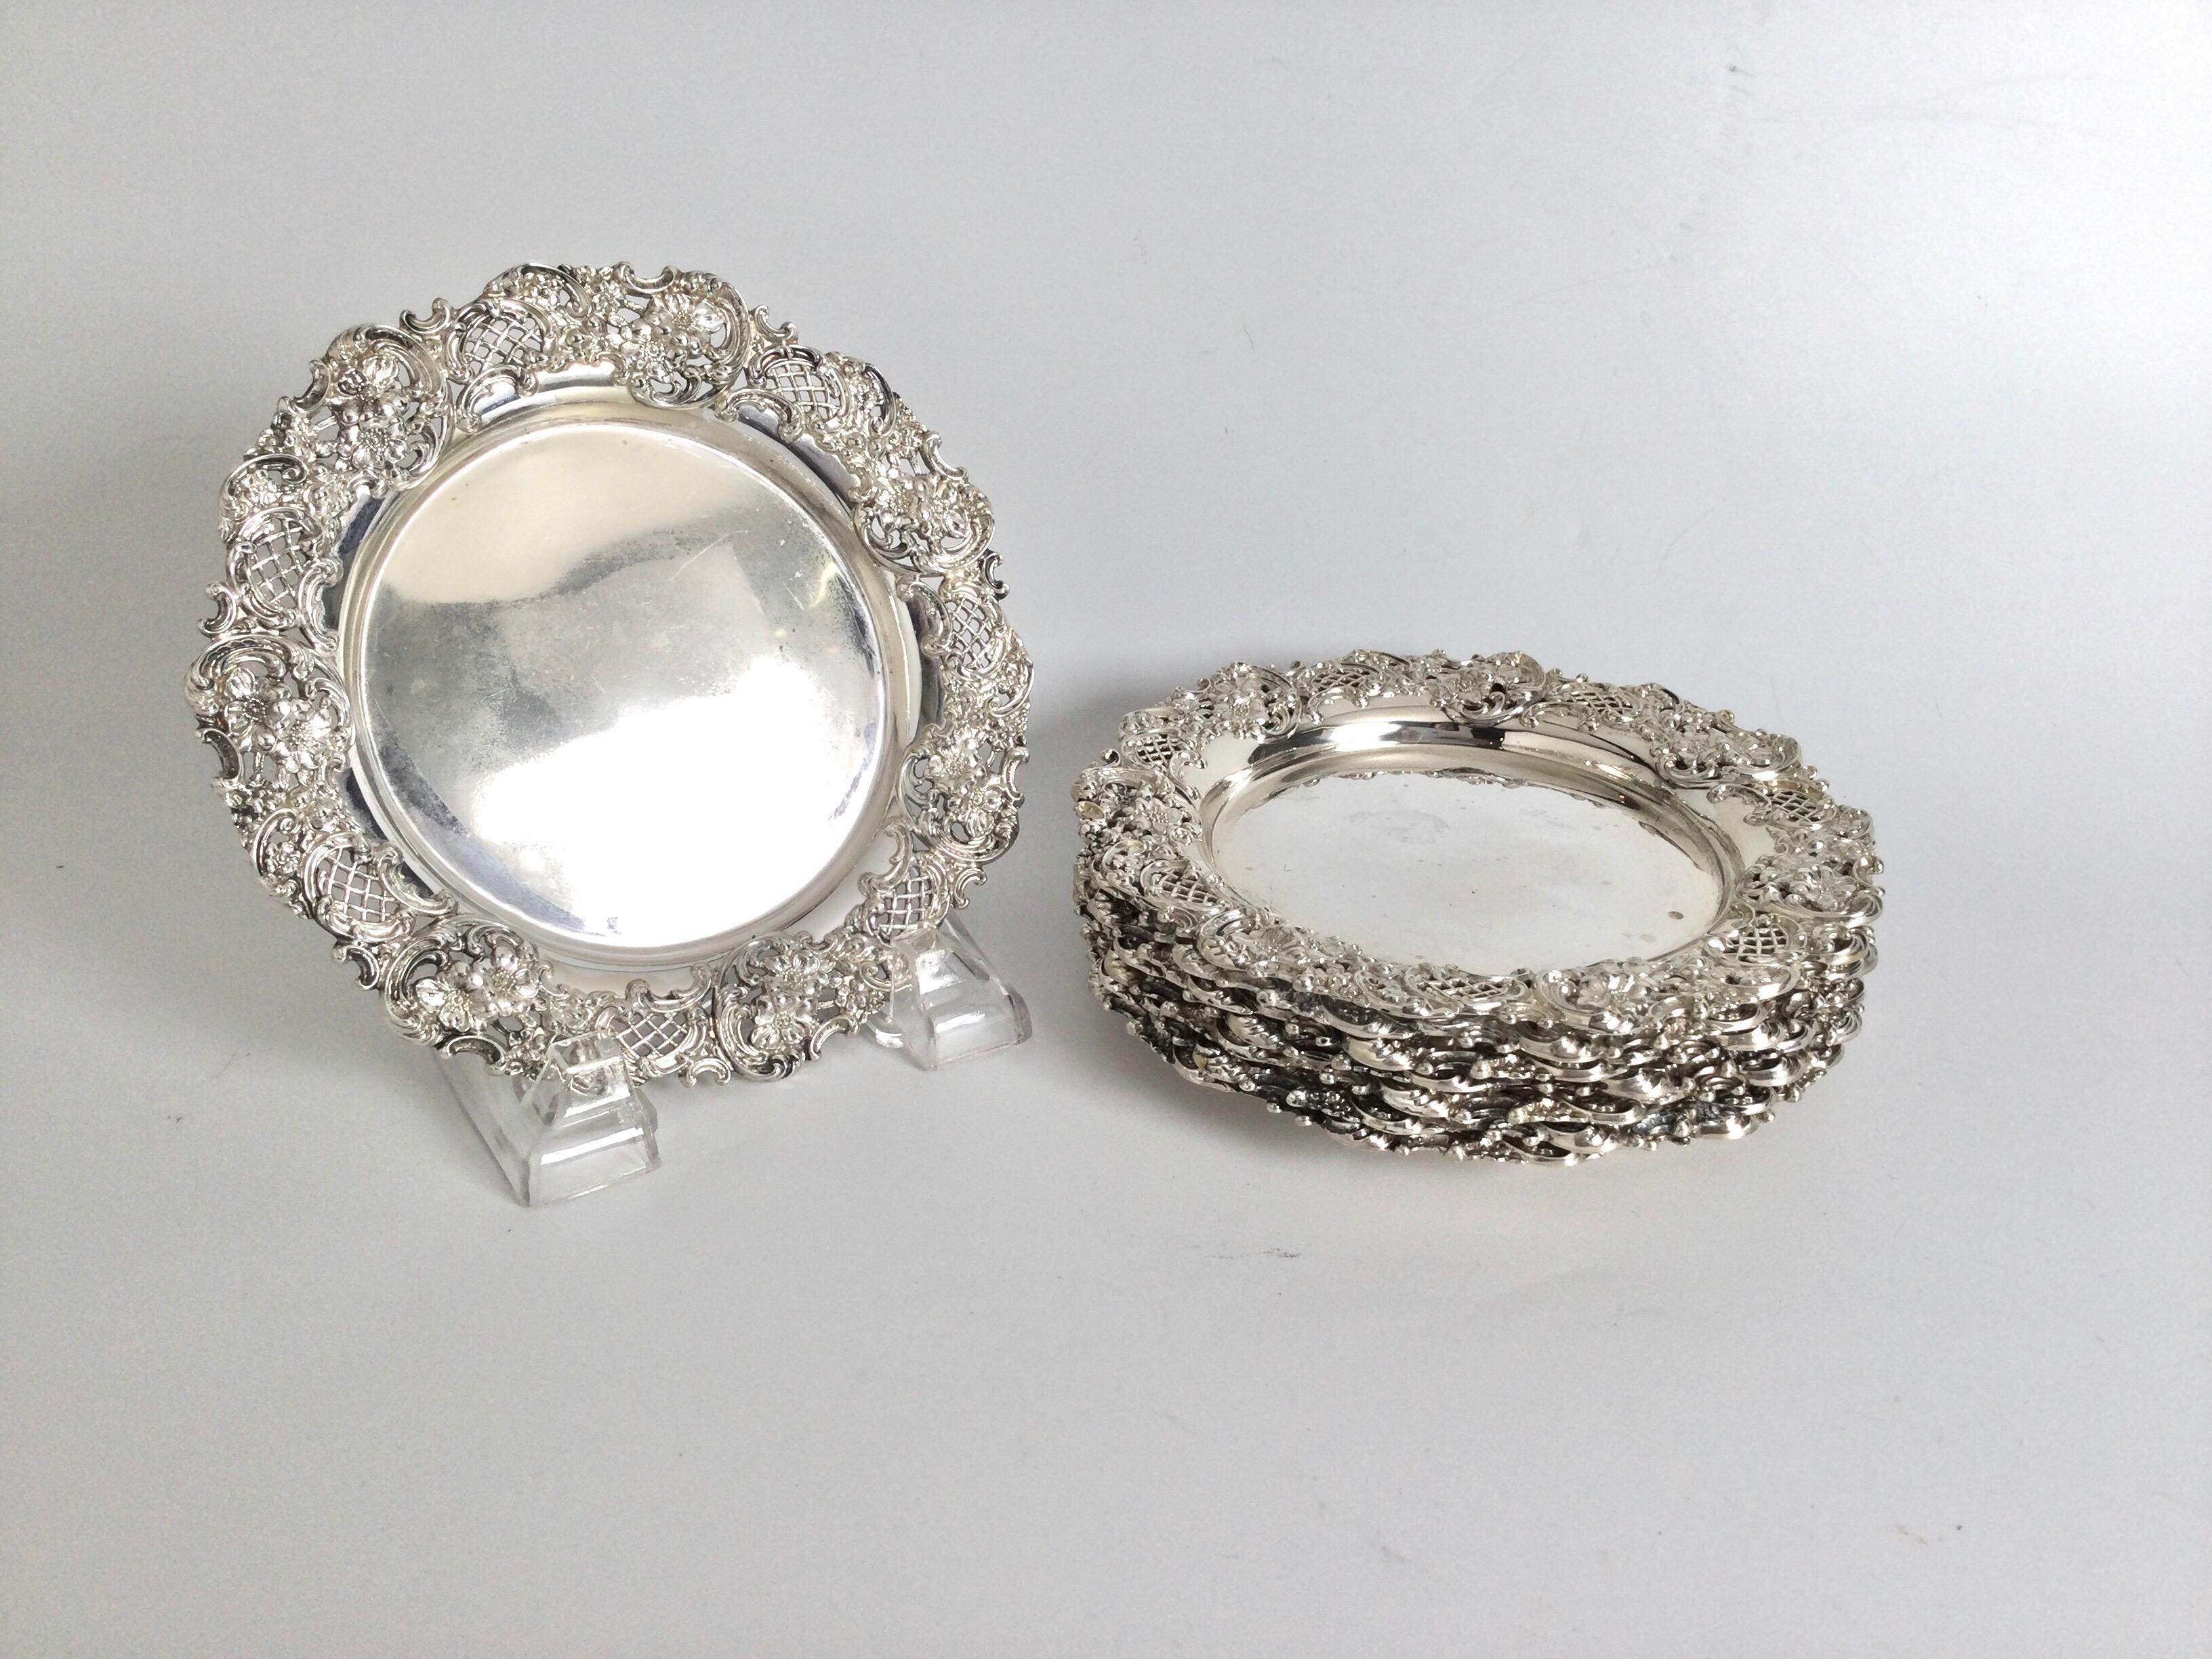 Edwardian Set of 8 J. E. Caldwell Sterling Silver Bread or Cake Plates For Sale